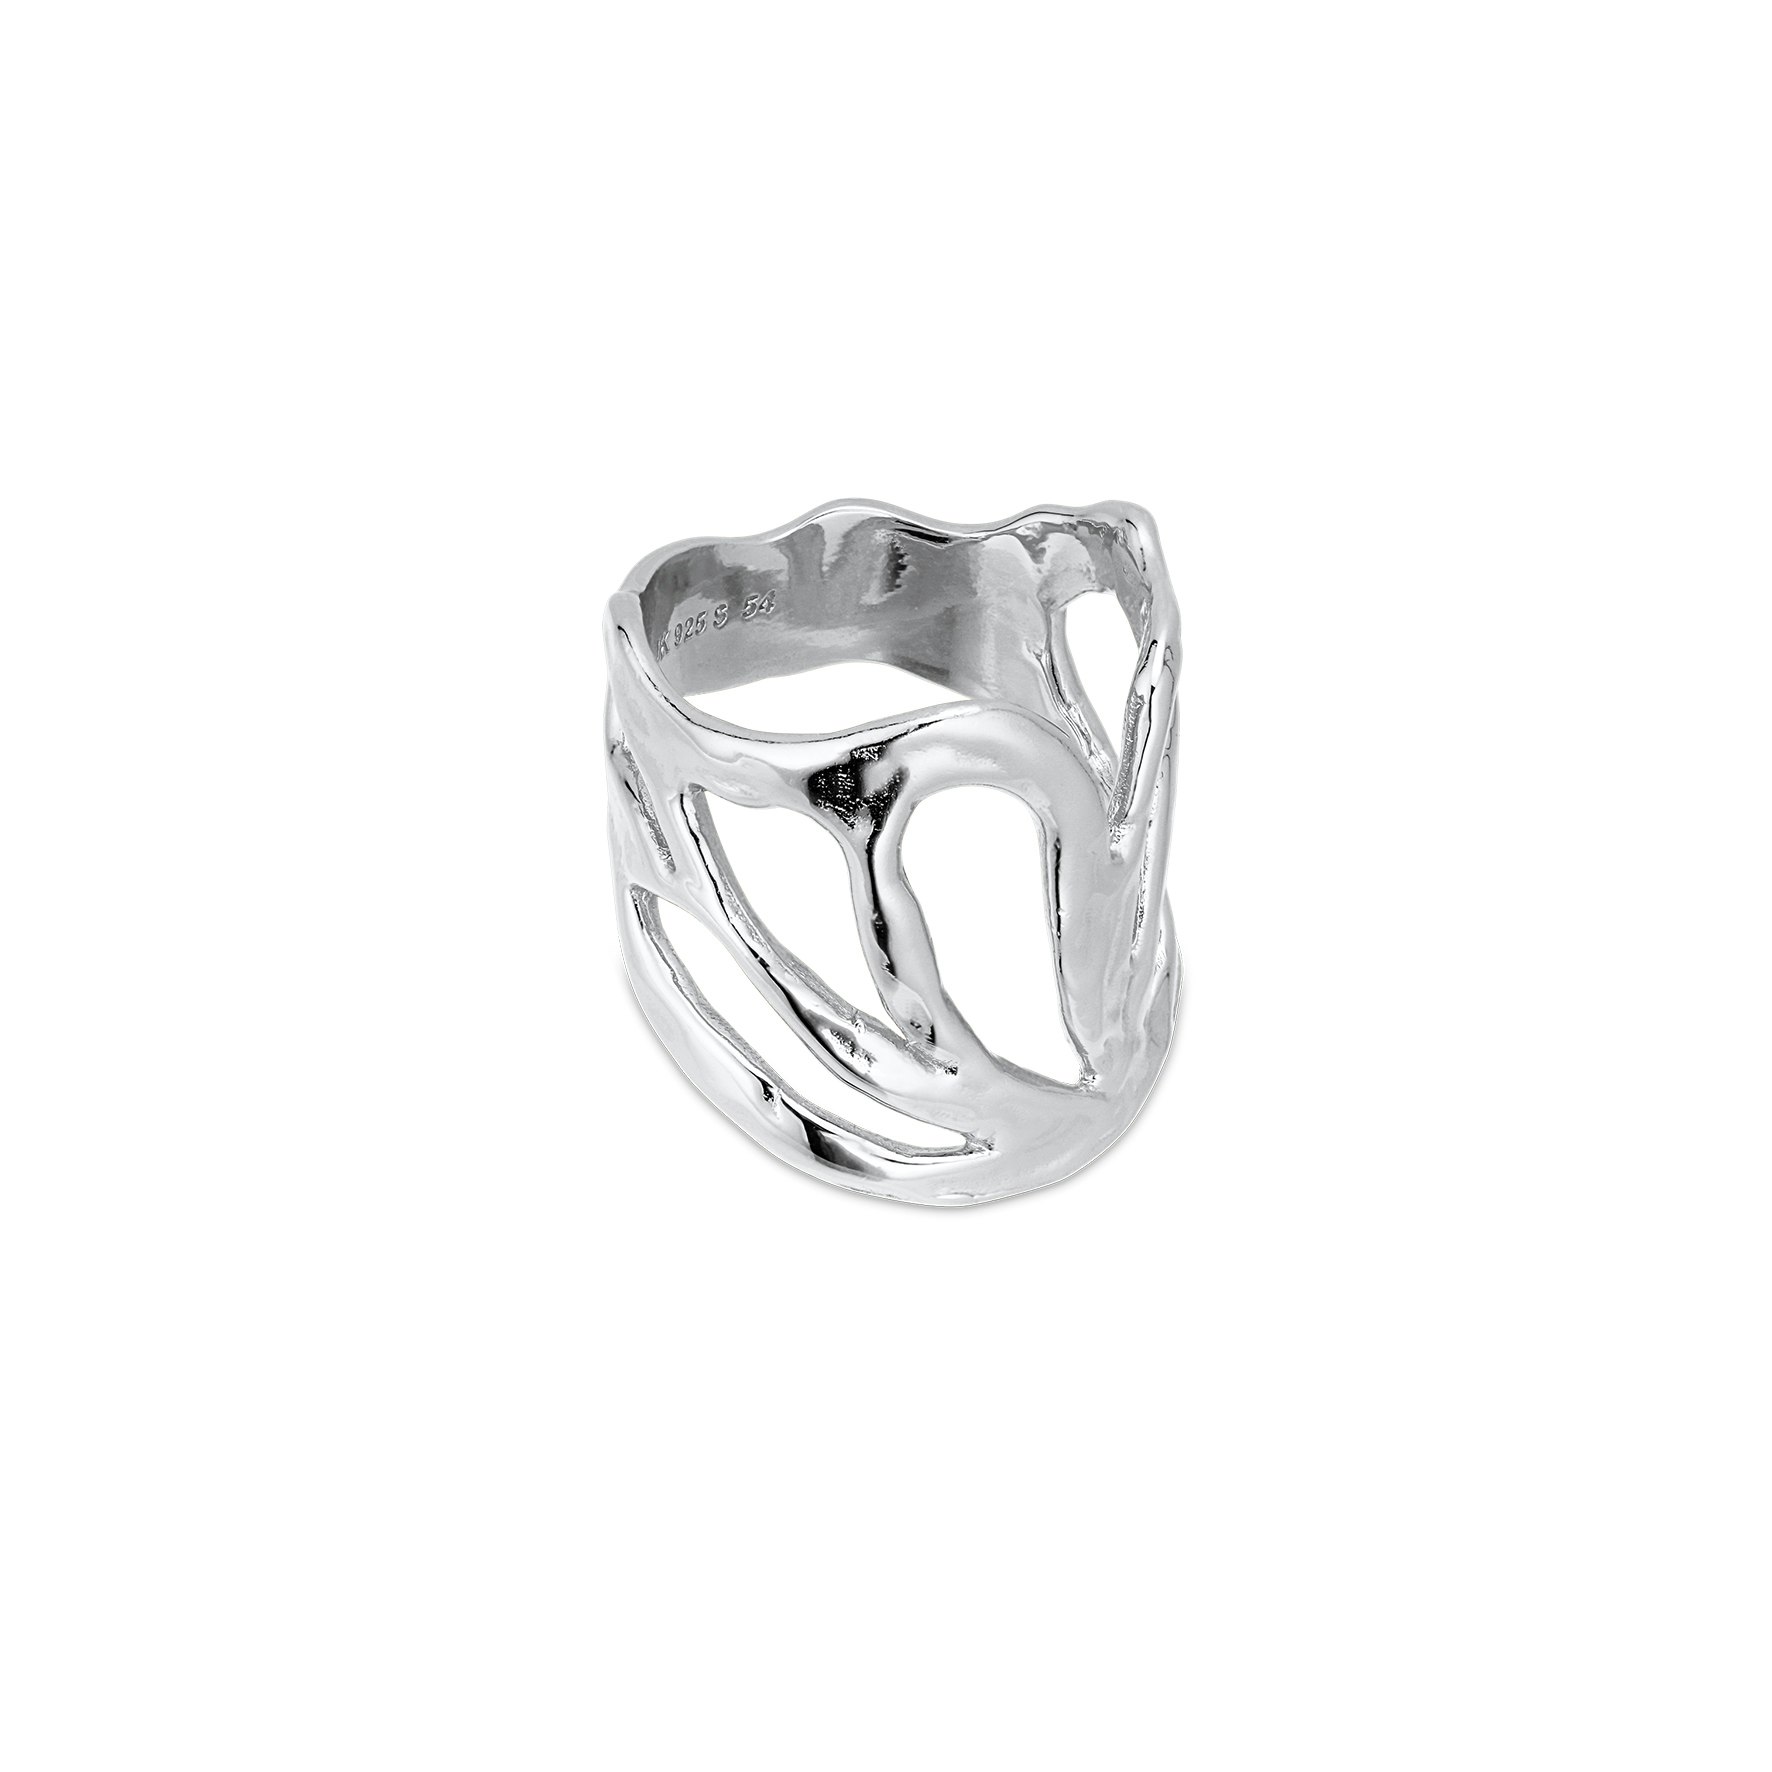 Big Butterfly Ring from Jane Kønig in Silver Sterling 925